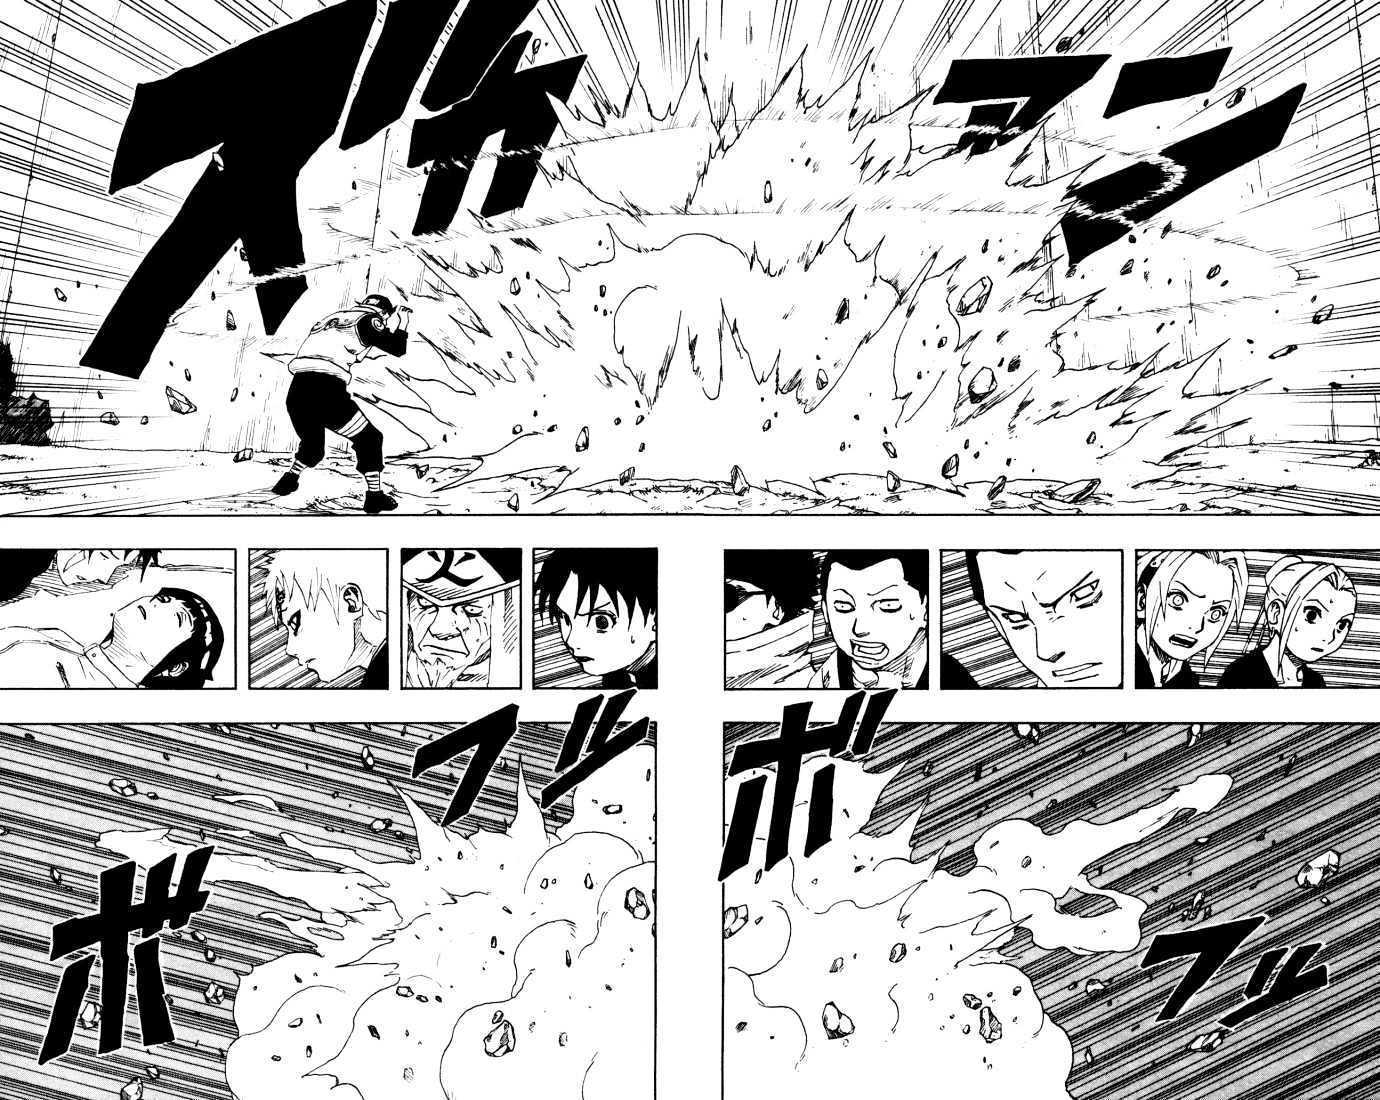 Vol.12 Chapter 104 – The Power to Change…!! | 11 page